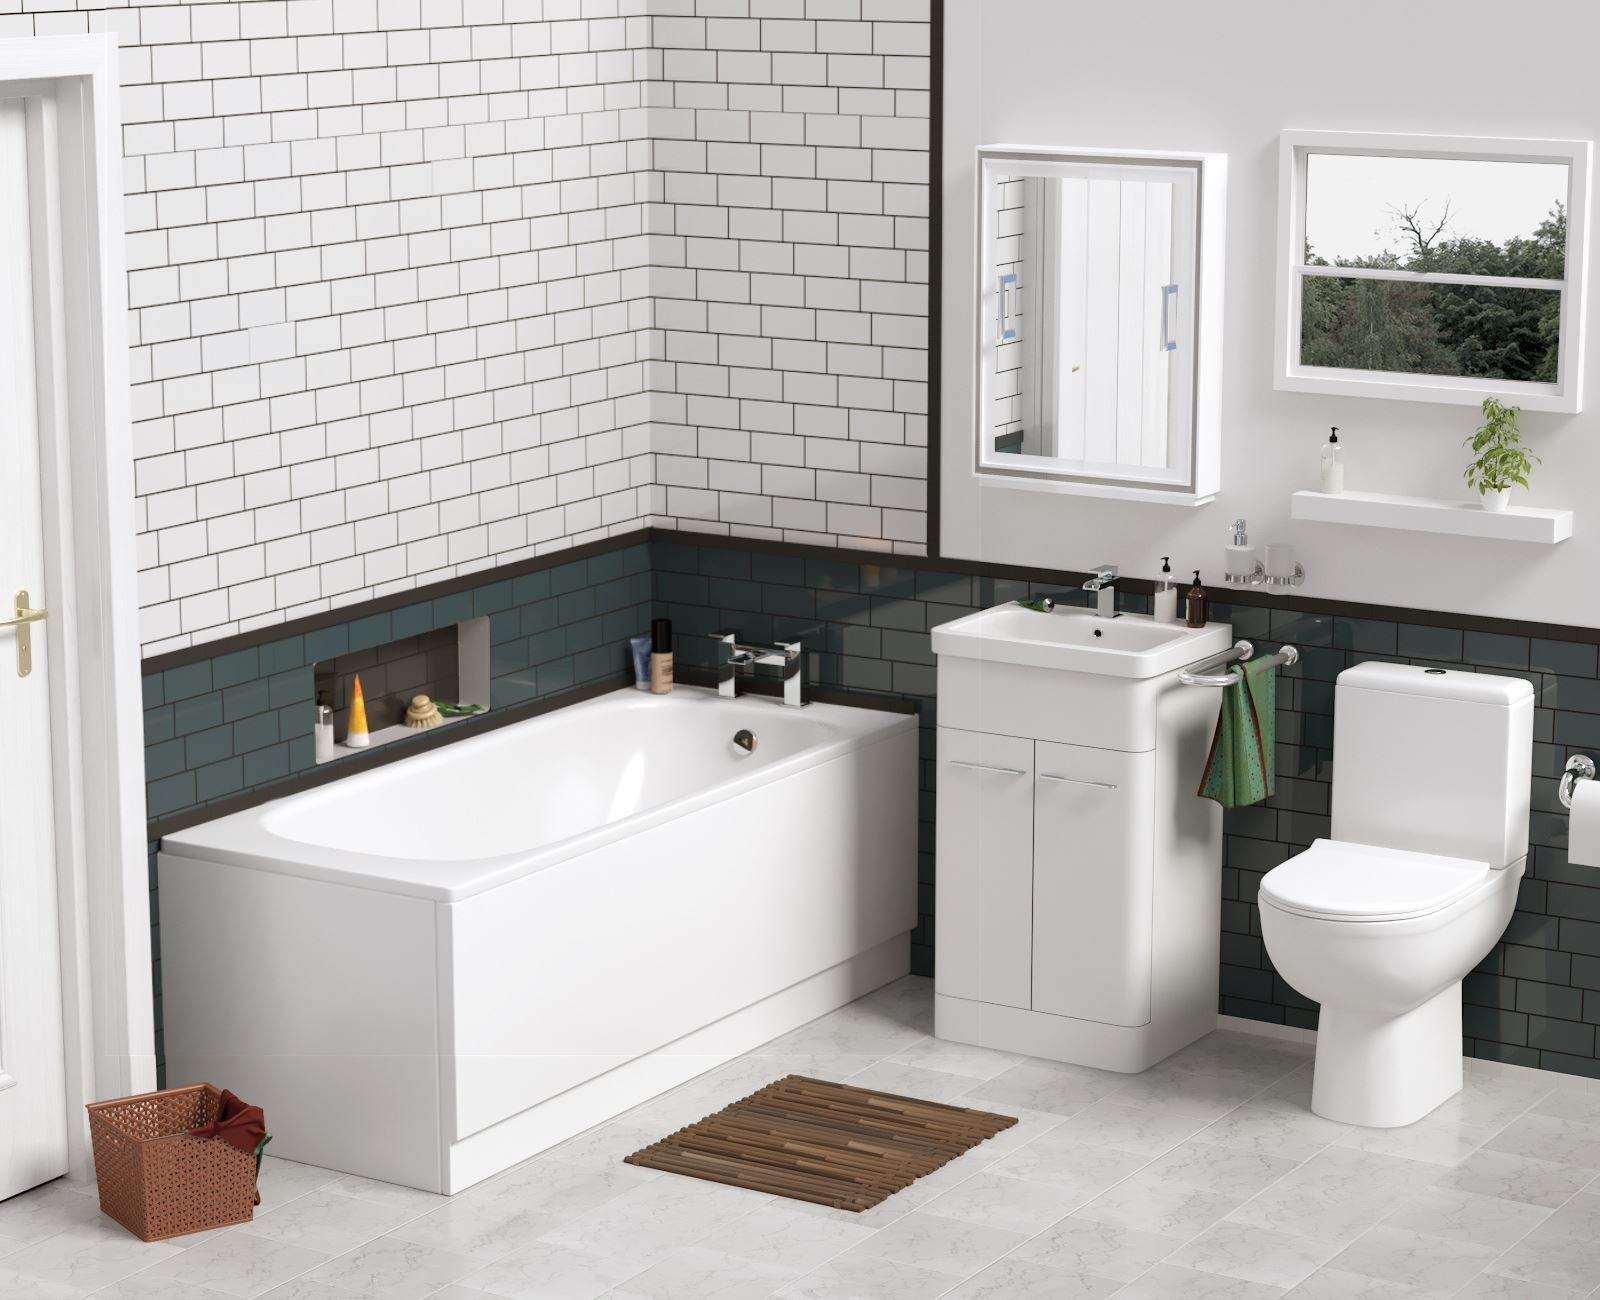 Alfred Victoria – Luxury Bathrooms and Designer Kitchens from UK